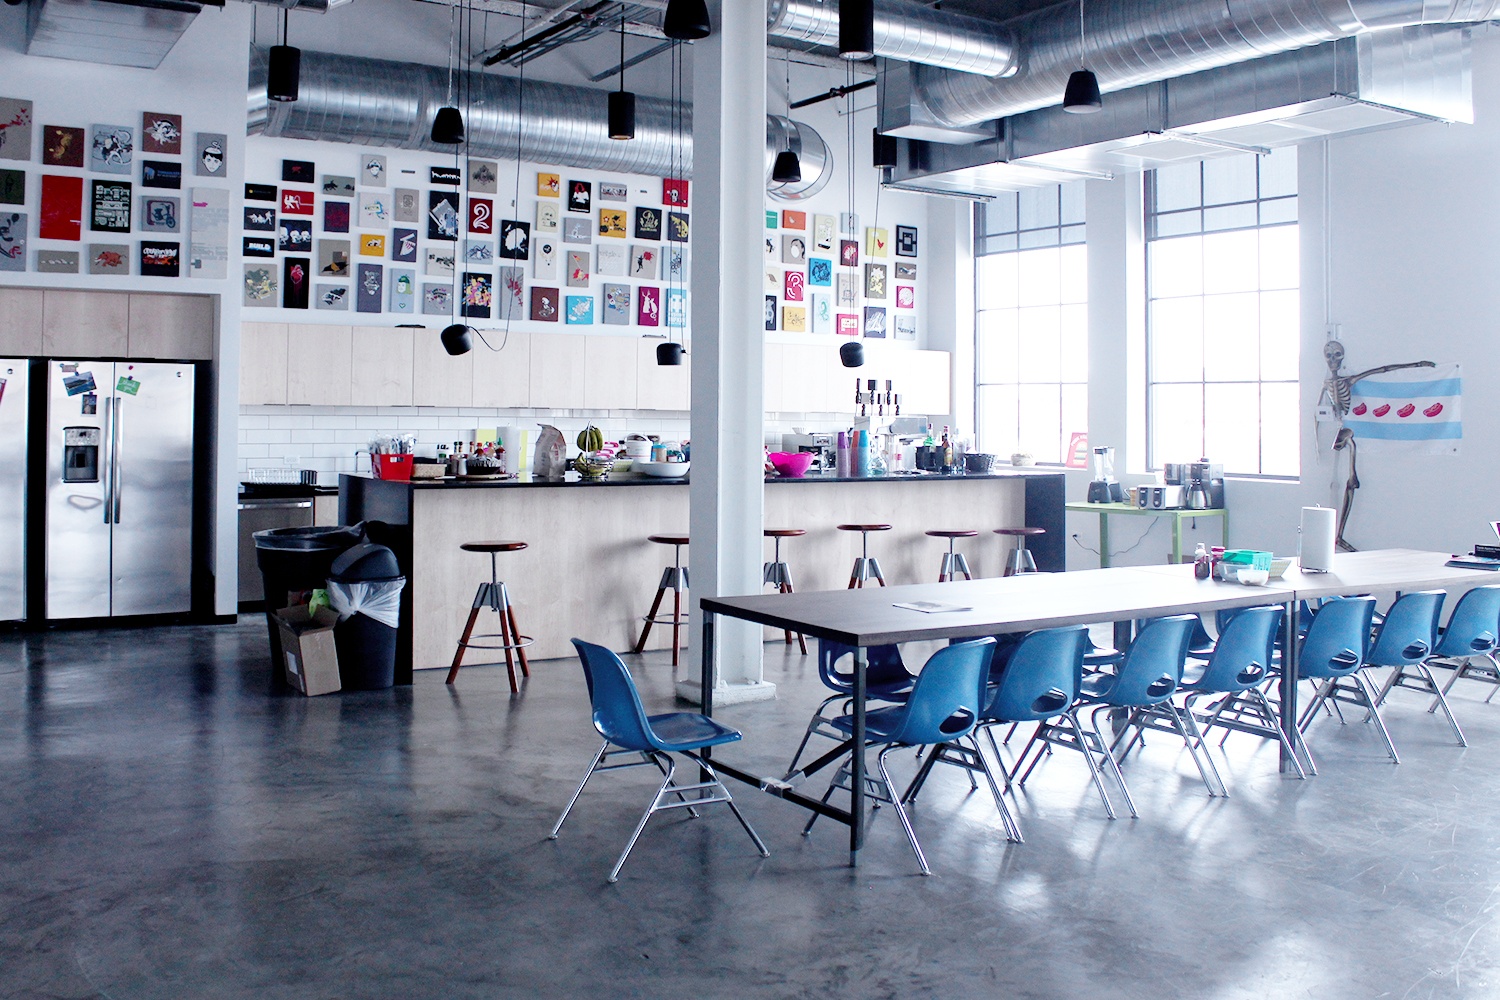 The open concept offices at Threadless.